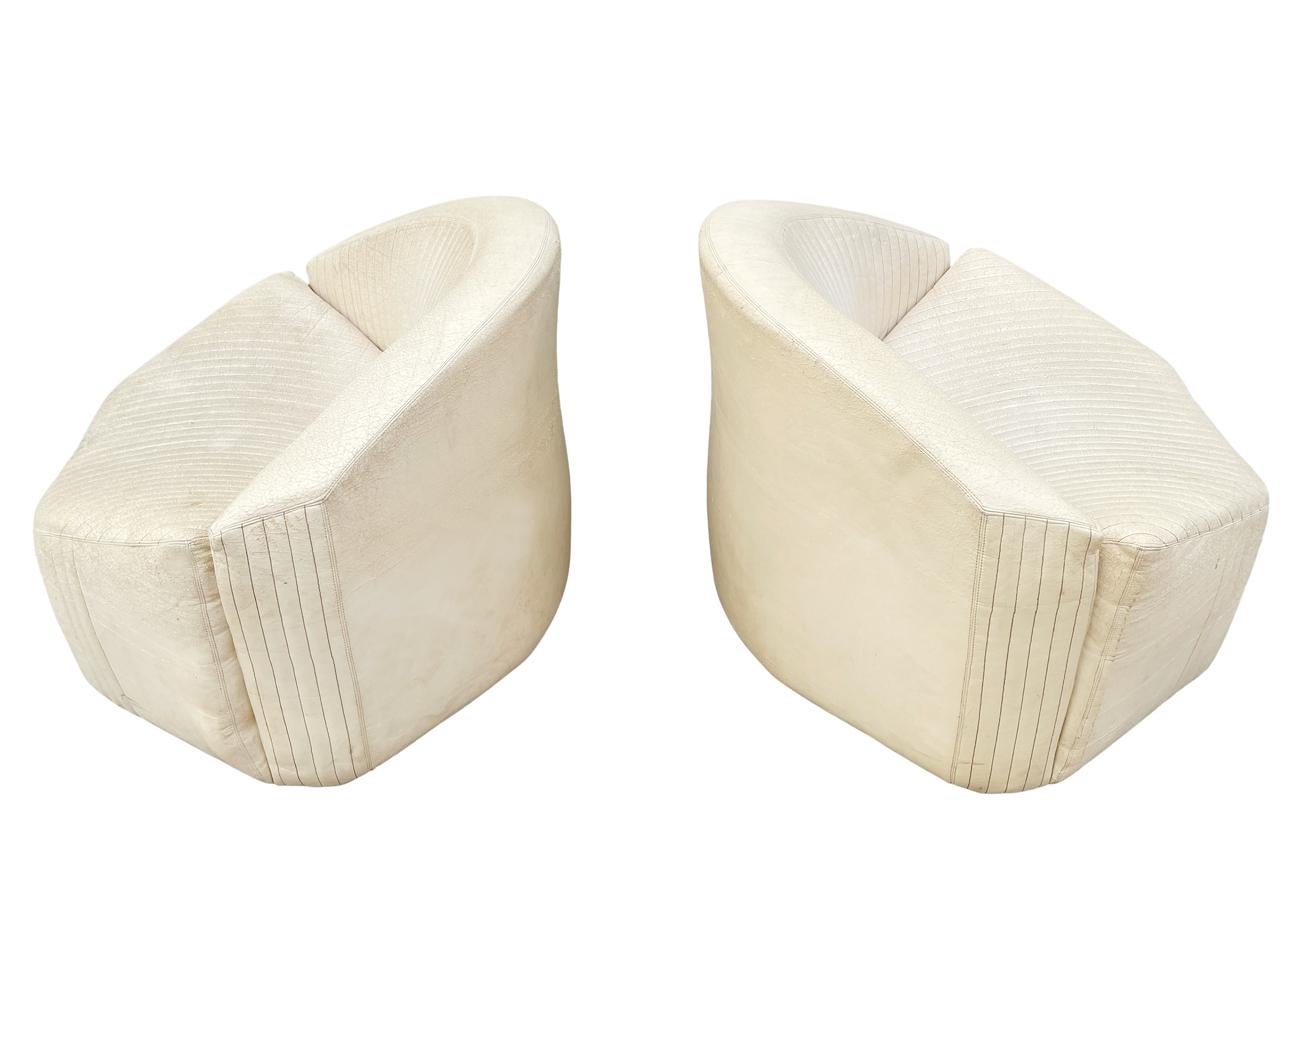 Late 20th Century Pair Mid-Century Modern White Leather Slipper Lounge Chairs by Giovanni Offredi For Sale